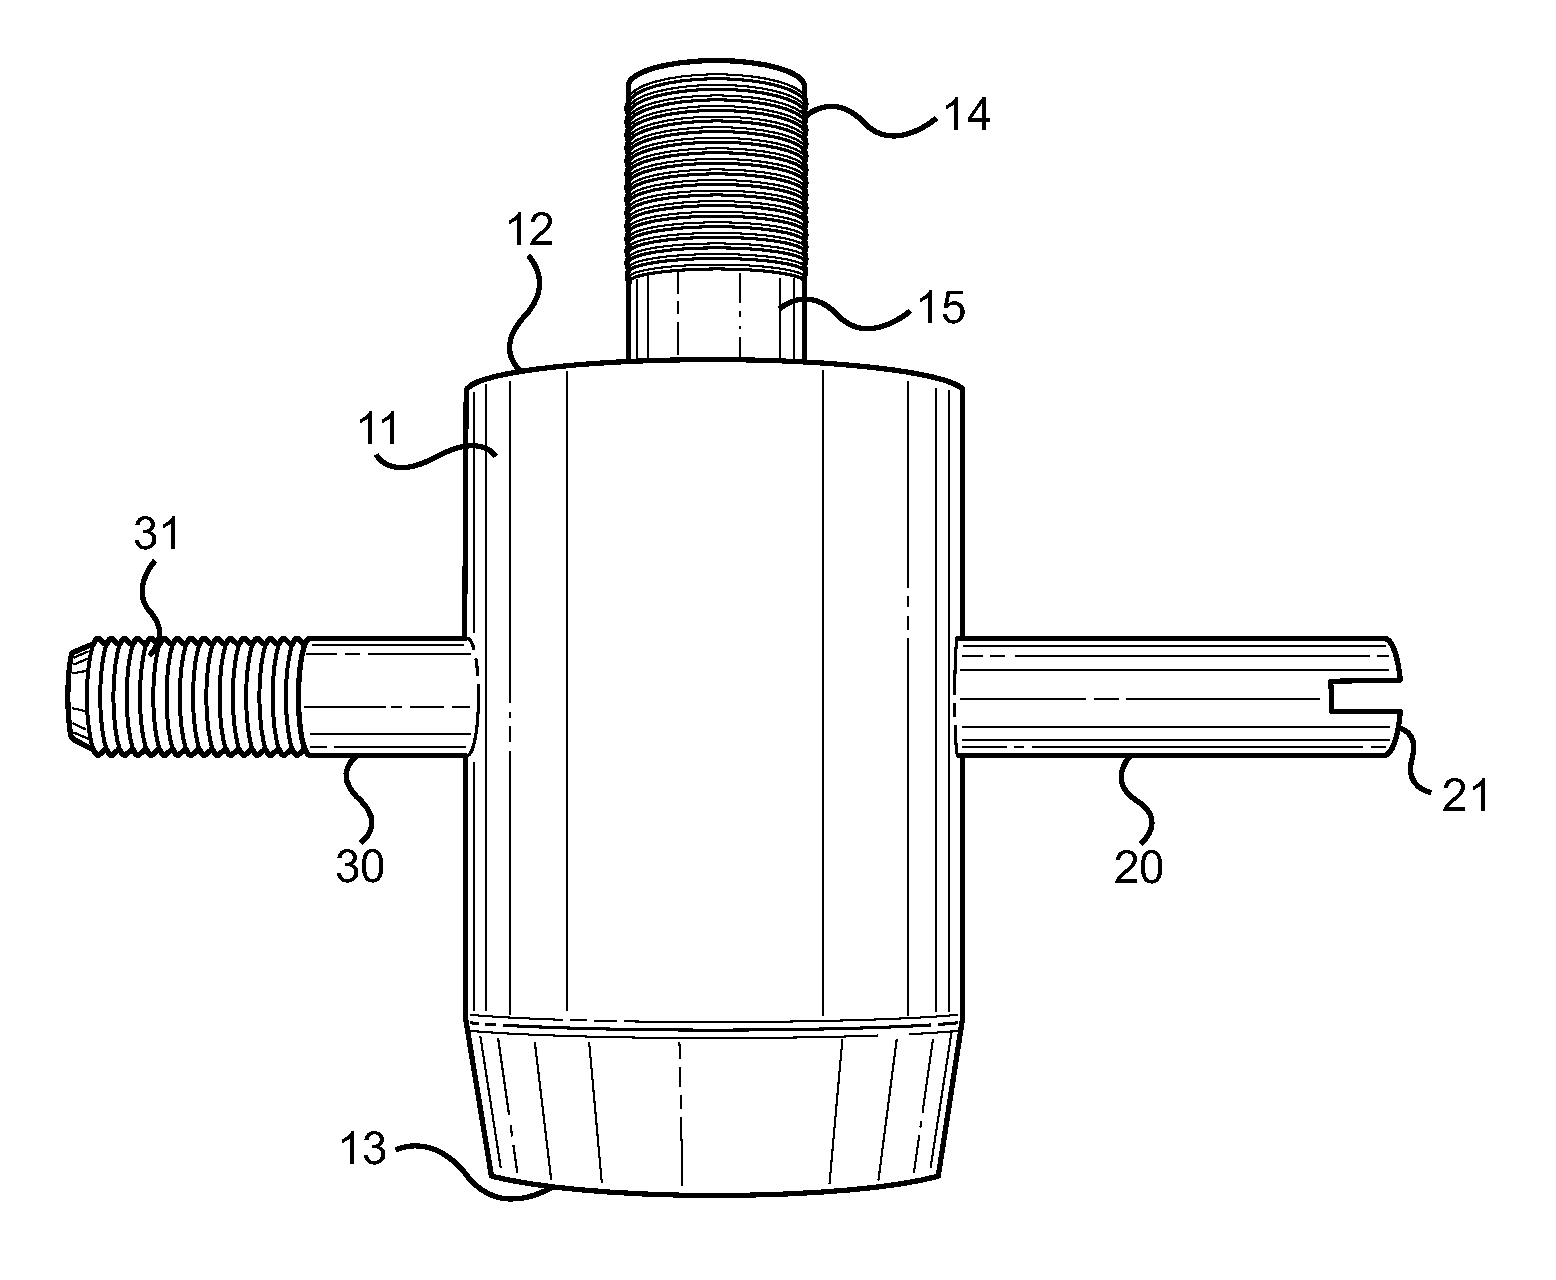 Tire valve tool having air communication means